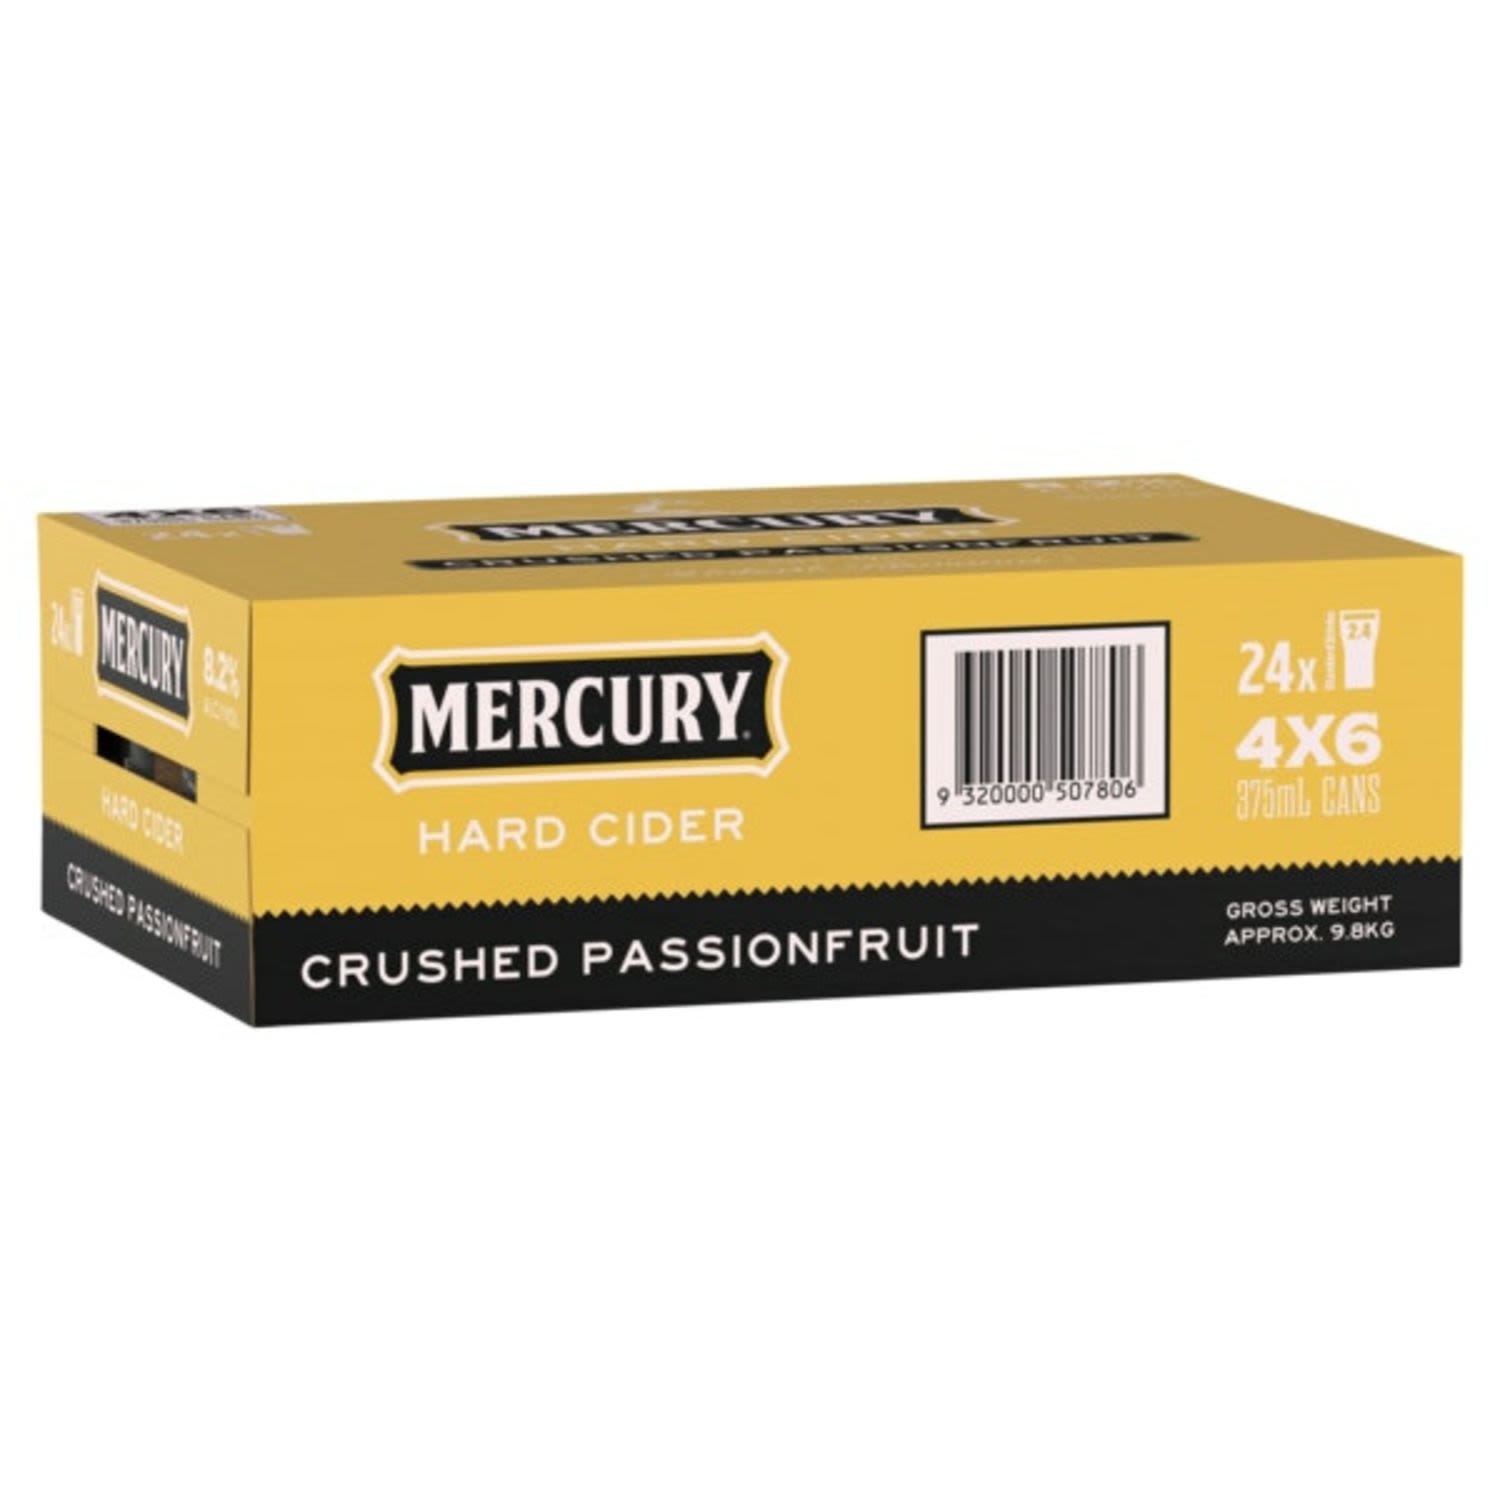 Fermented with real passionfruit to create a delicate passionfruit aroma and subtle but noticeable flavour on the palate. Pleasantly balanced with an upfront refreshing tartness and smooth finish.<br /> <br />Alcohol Volume: 8.20%<br /><br />Pack Format: 24 Pack<br /><br />Standard Drinks: 2.4<br /><br />Pack Type: Can<br /><br />Country of Origin: Australia<br />